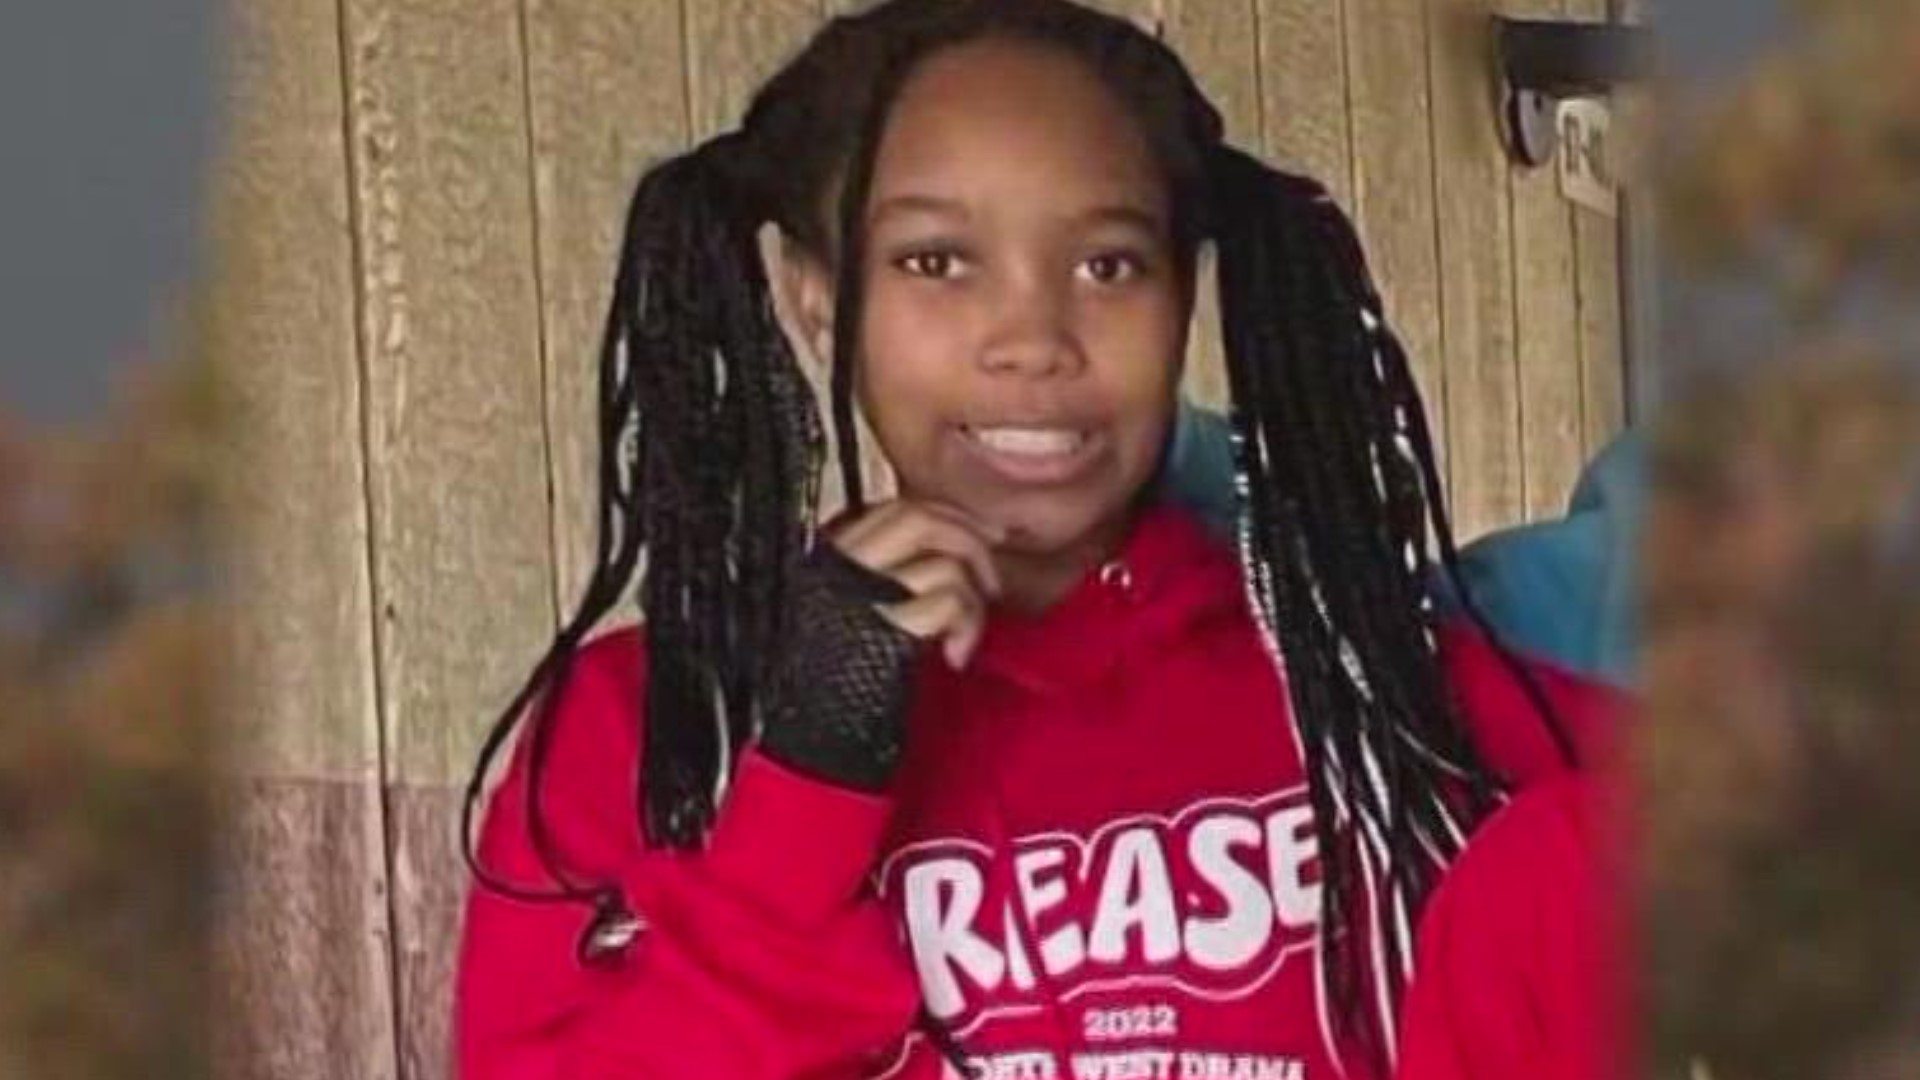 14-year-old Aliyah Marie Thornhill was with a friend on Haw River Road when she was struck by a car and died.